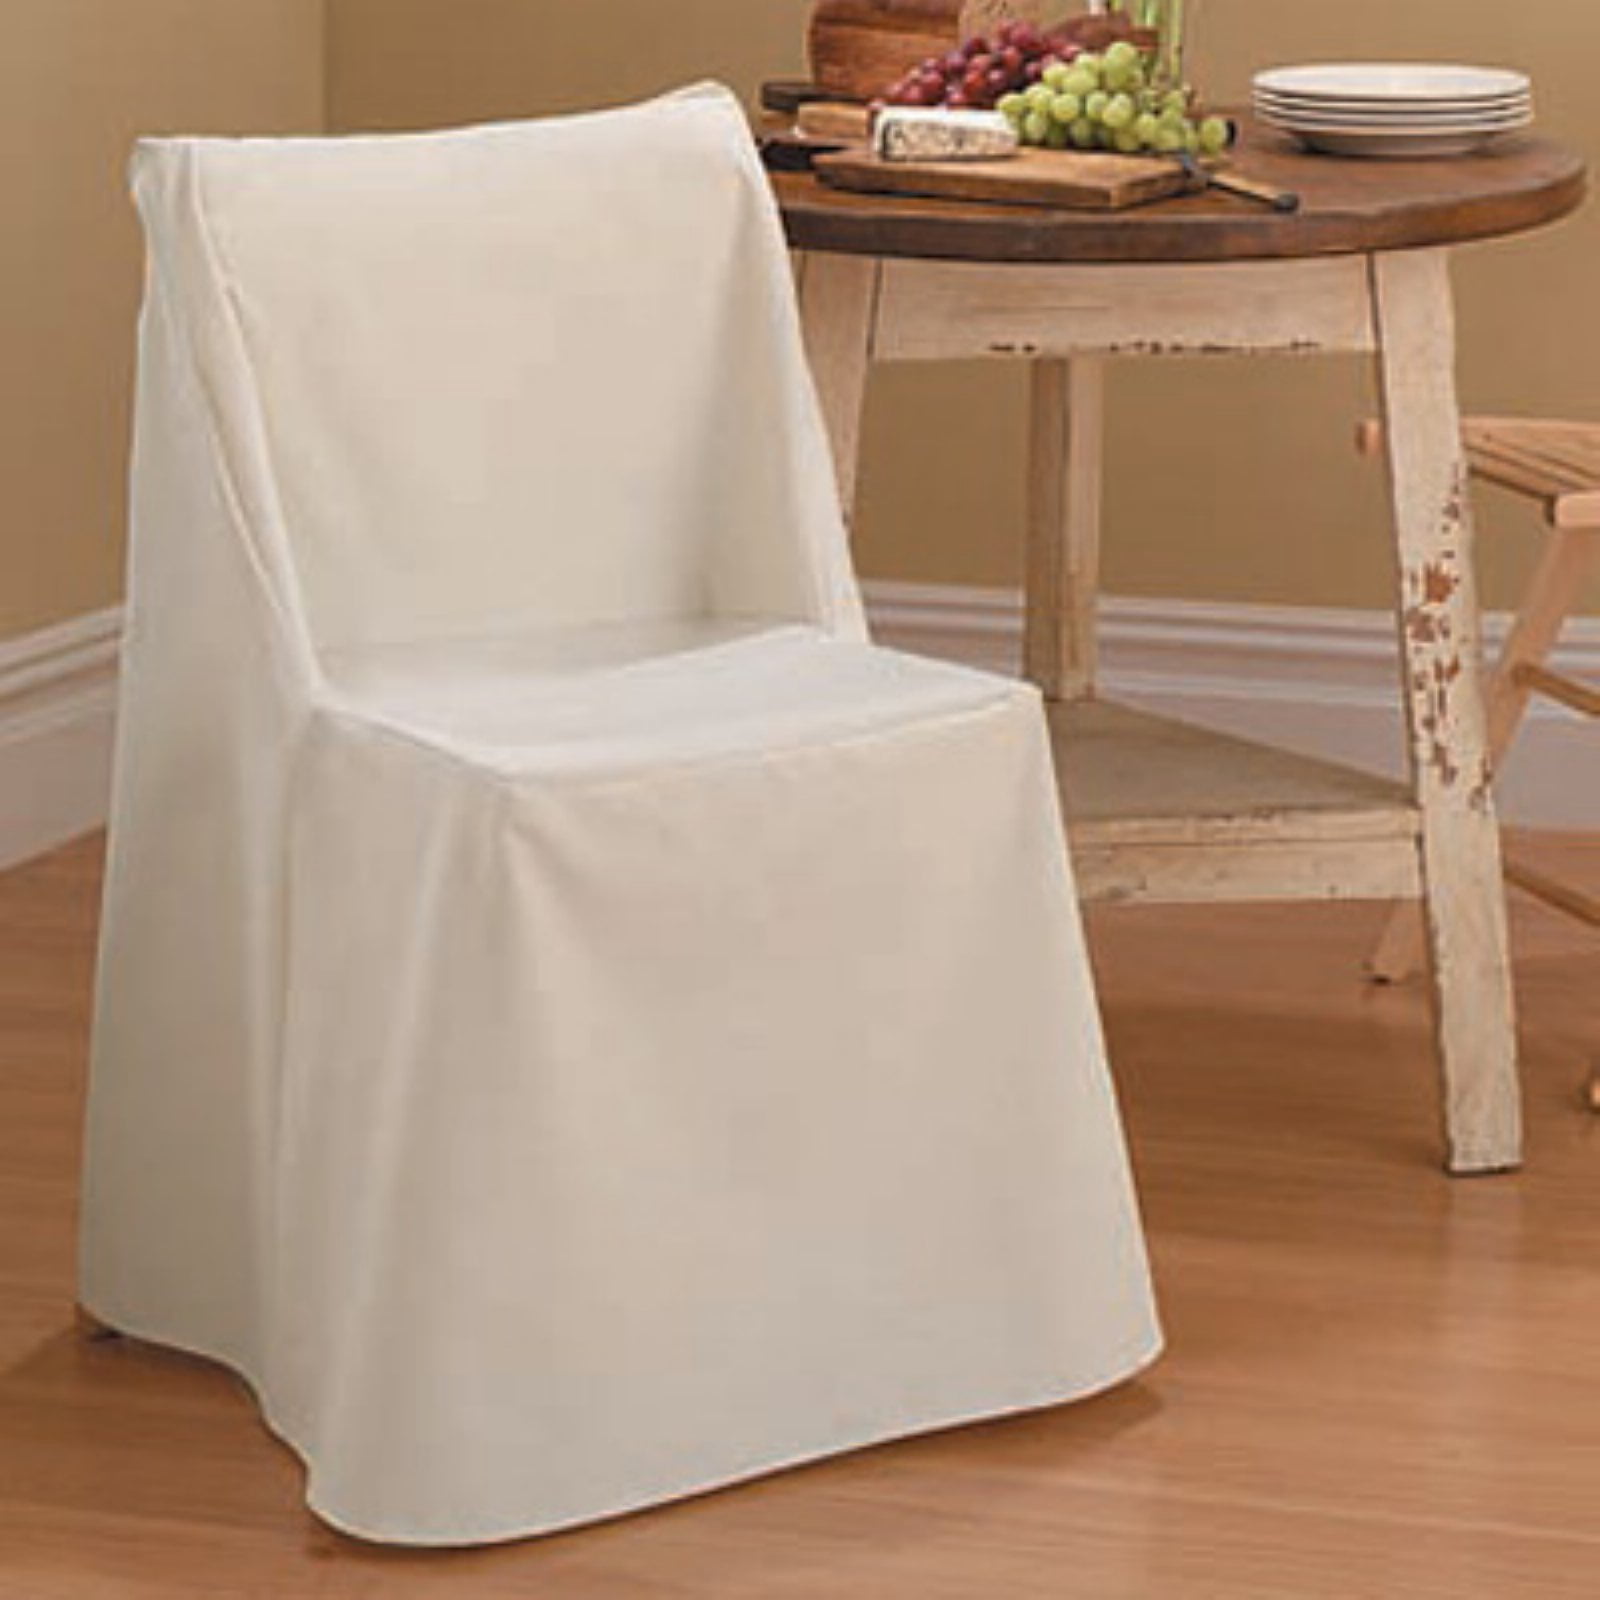 Sure Fit Cotton Duck Wing Chair Slipcover in Natural (As Is Item